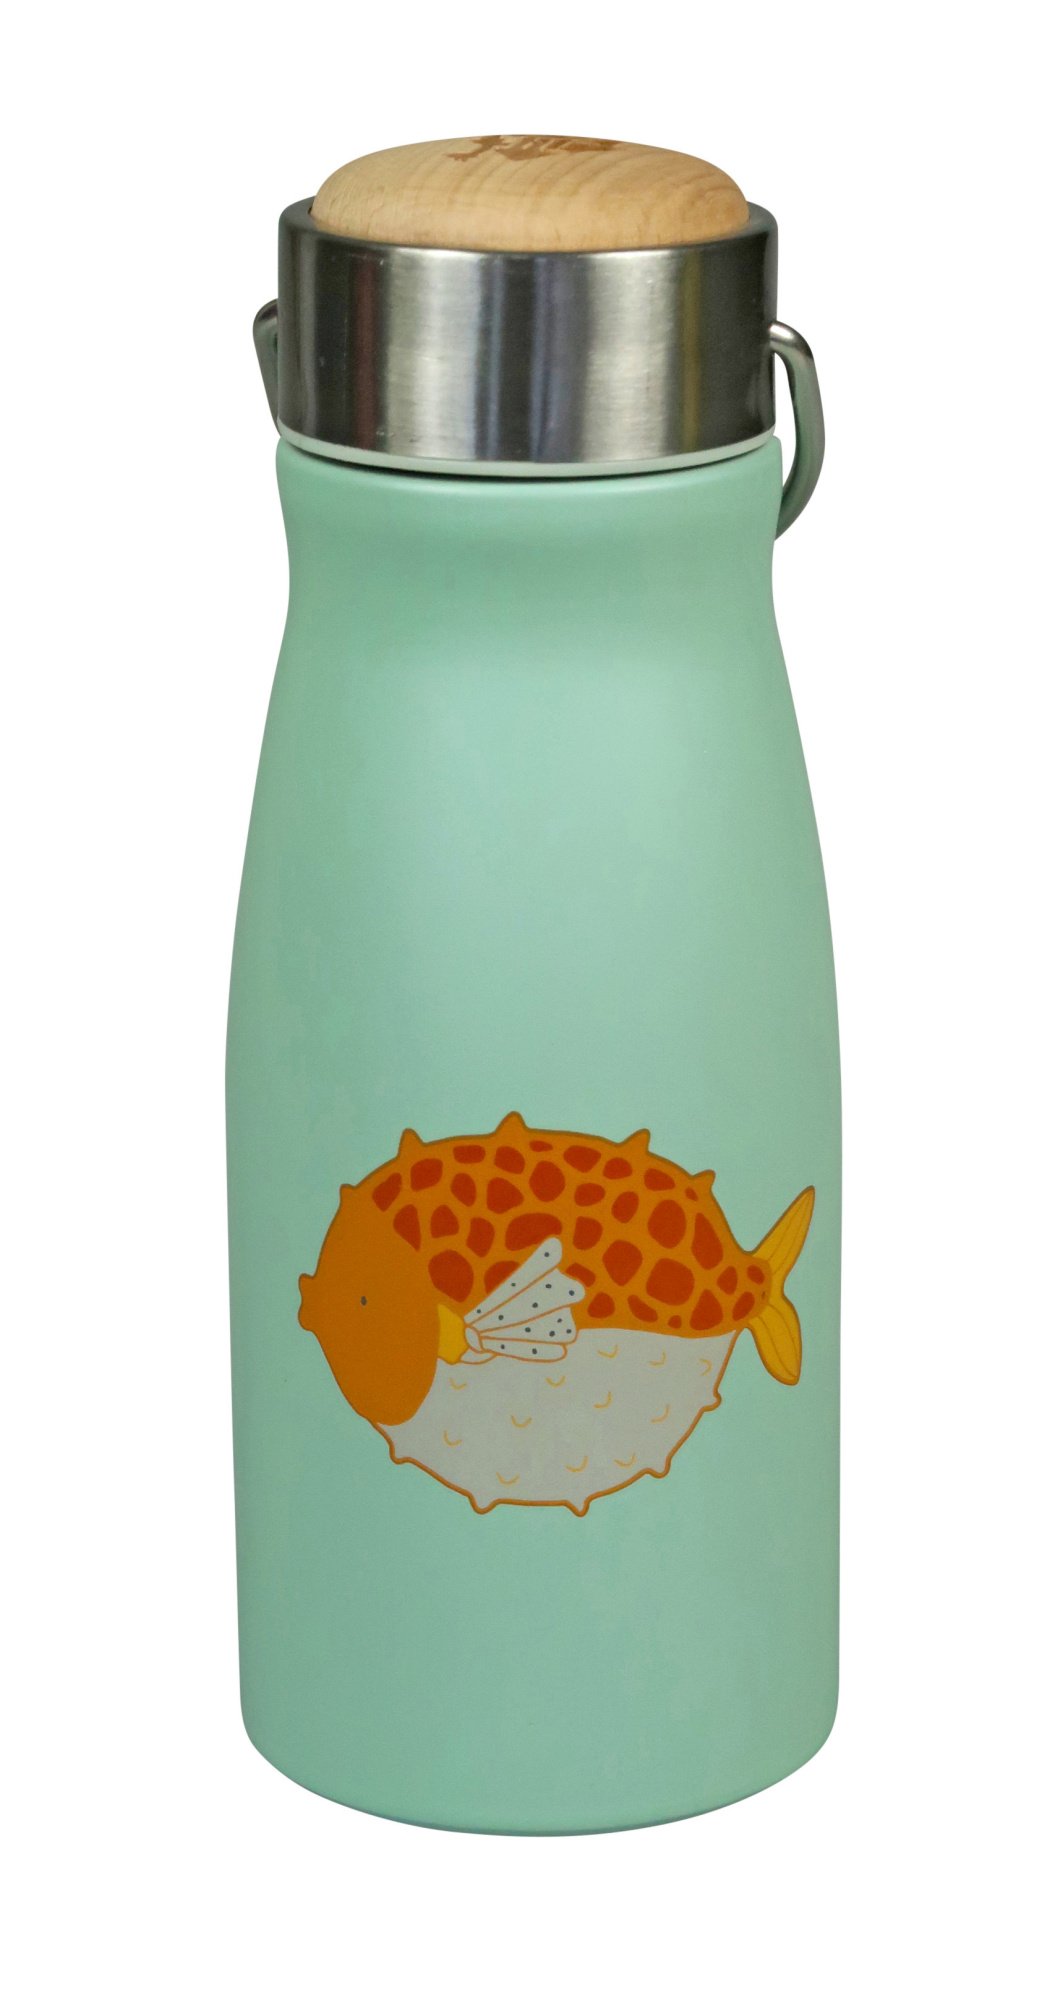 The Zoo Edelstahl Kinder Isolierflasche Thermoskanne Thermosflasche 300ml 